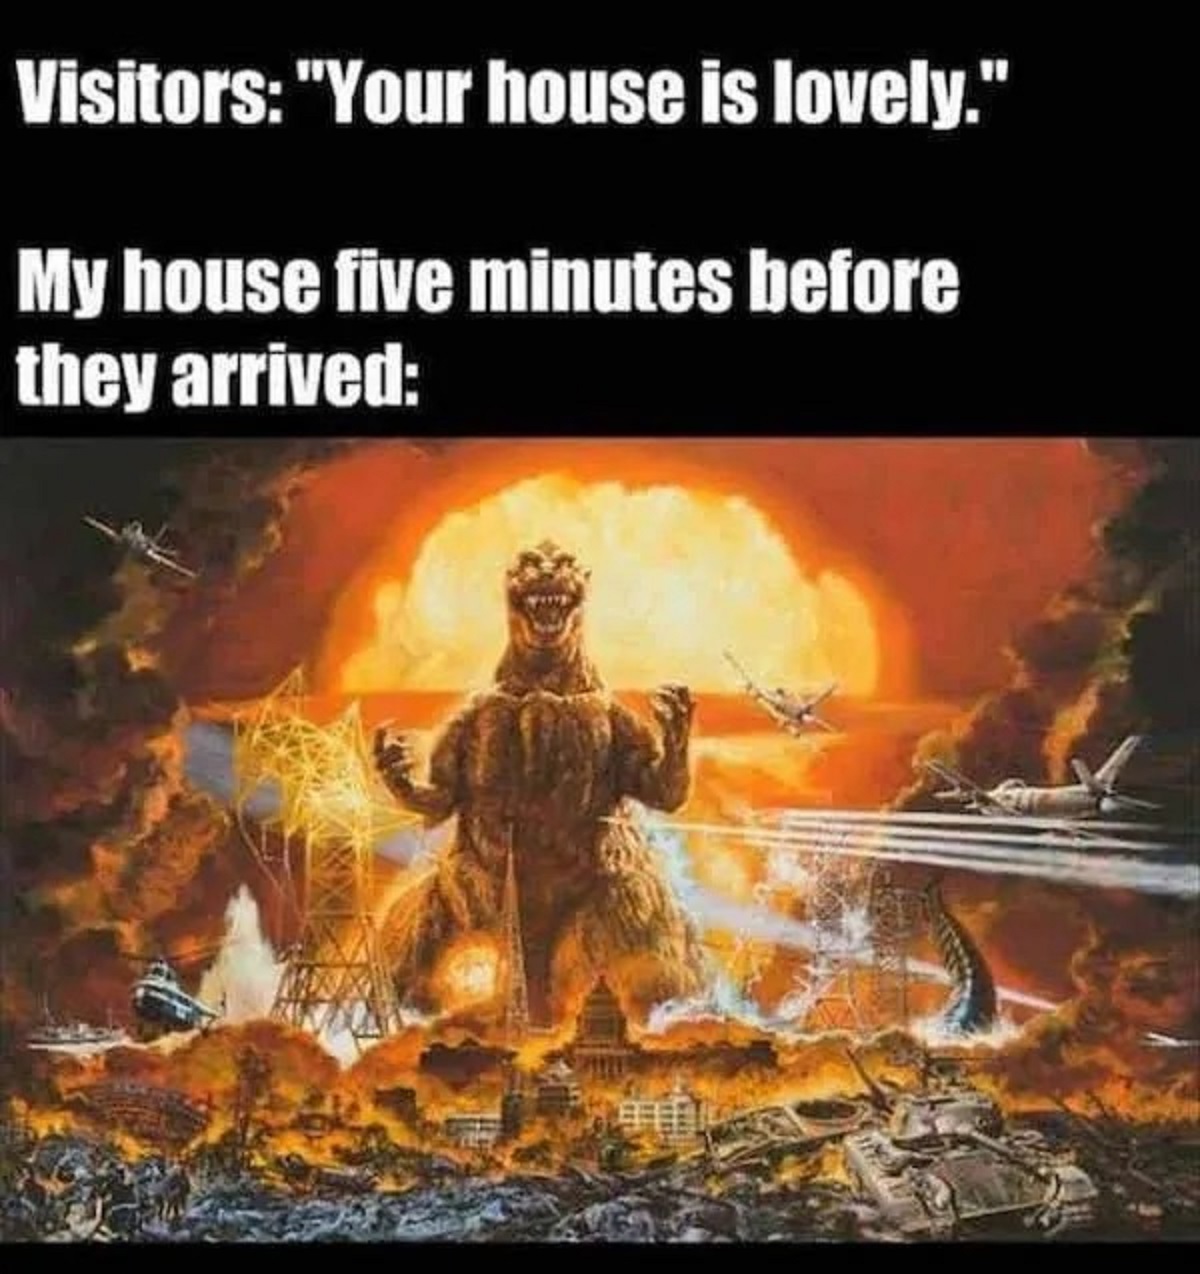 noriyoshi ohrai - Visitors "Your house is lovely." My house five minutes before they arrived